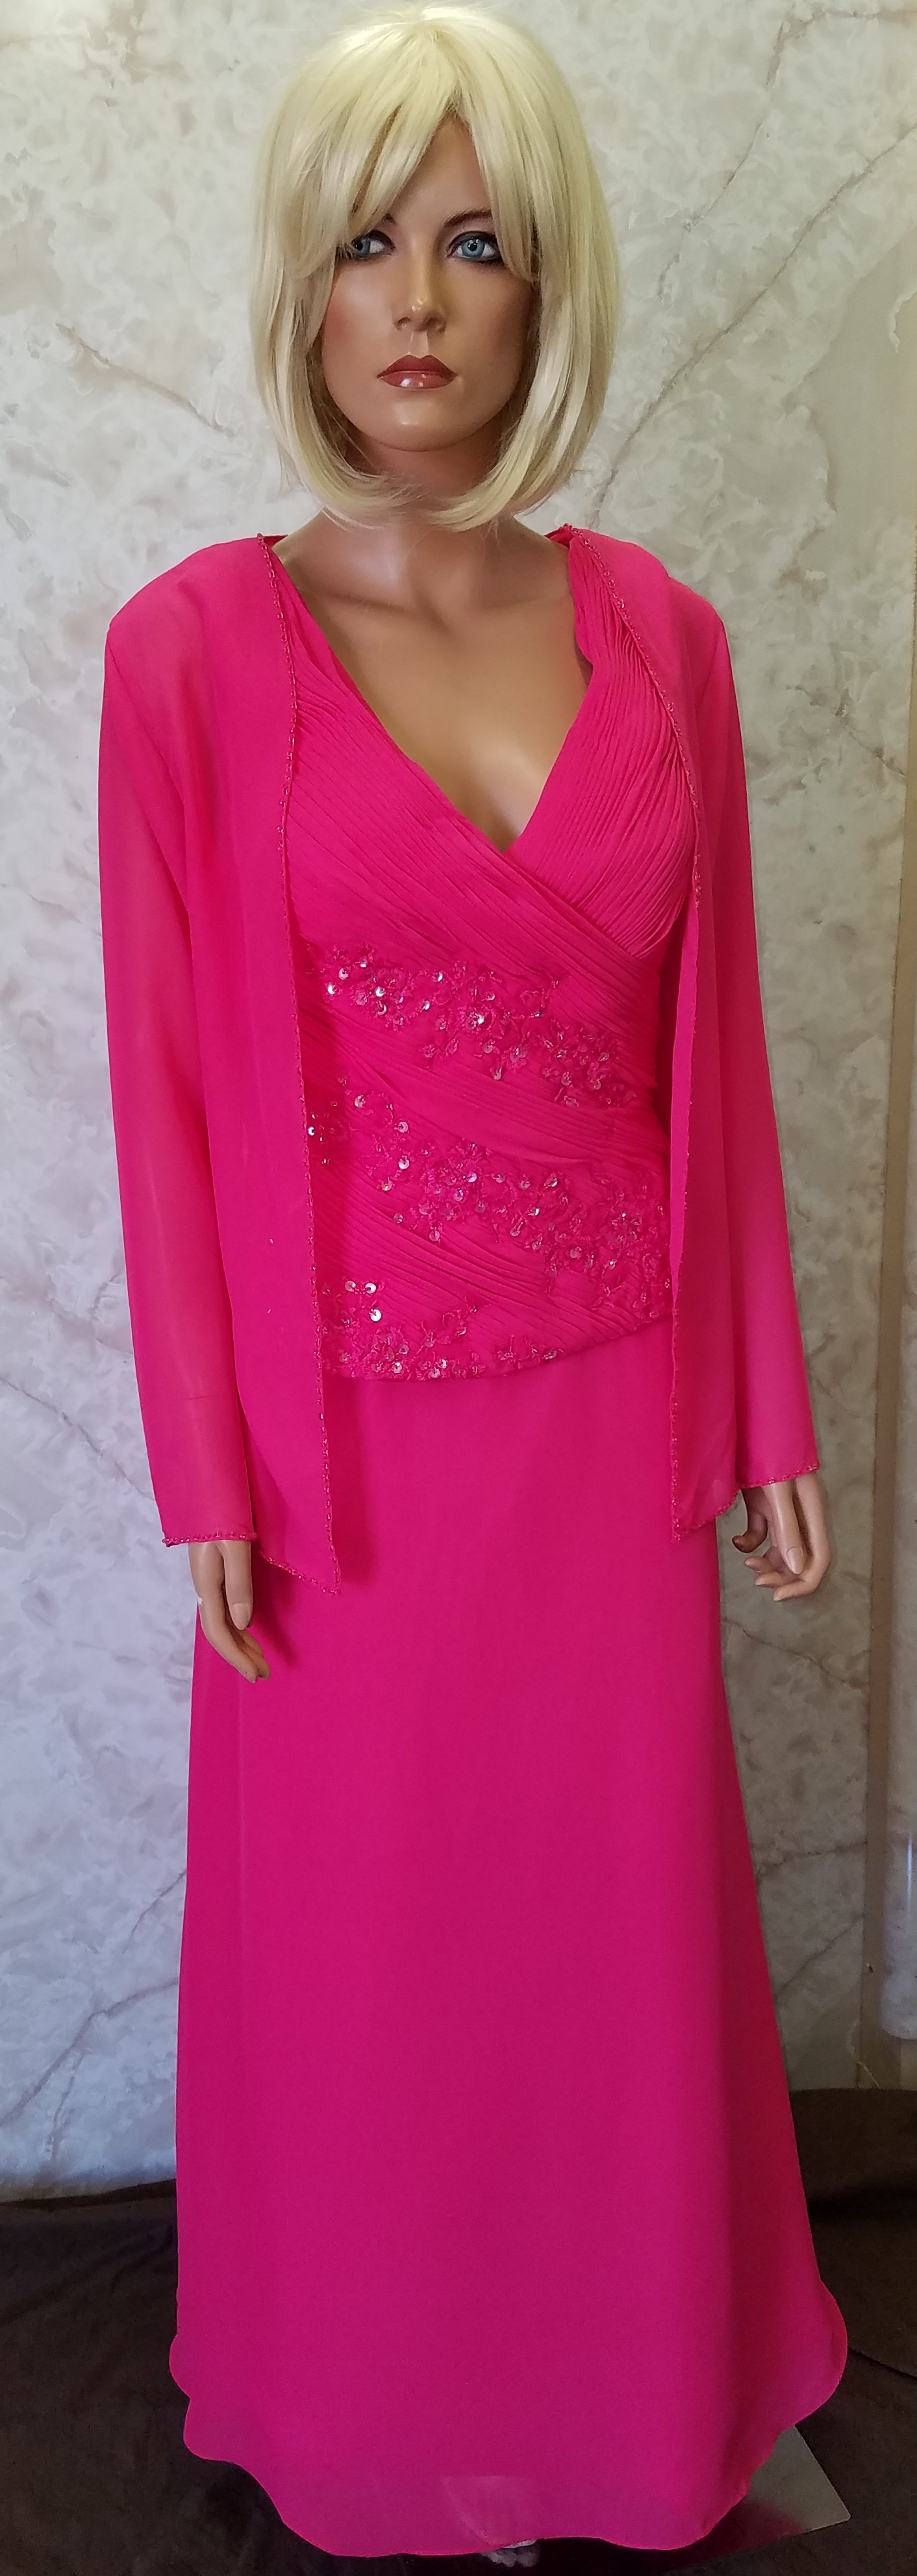 dress and jacket for wedding mother of the bride